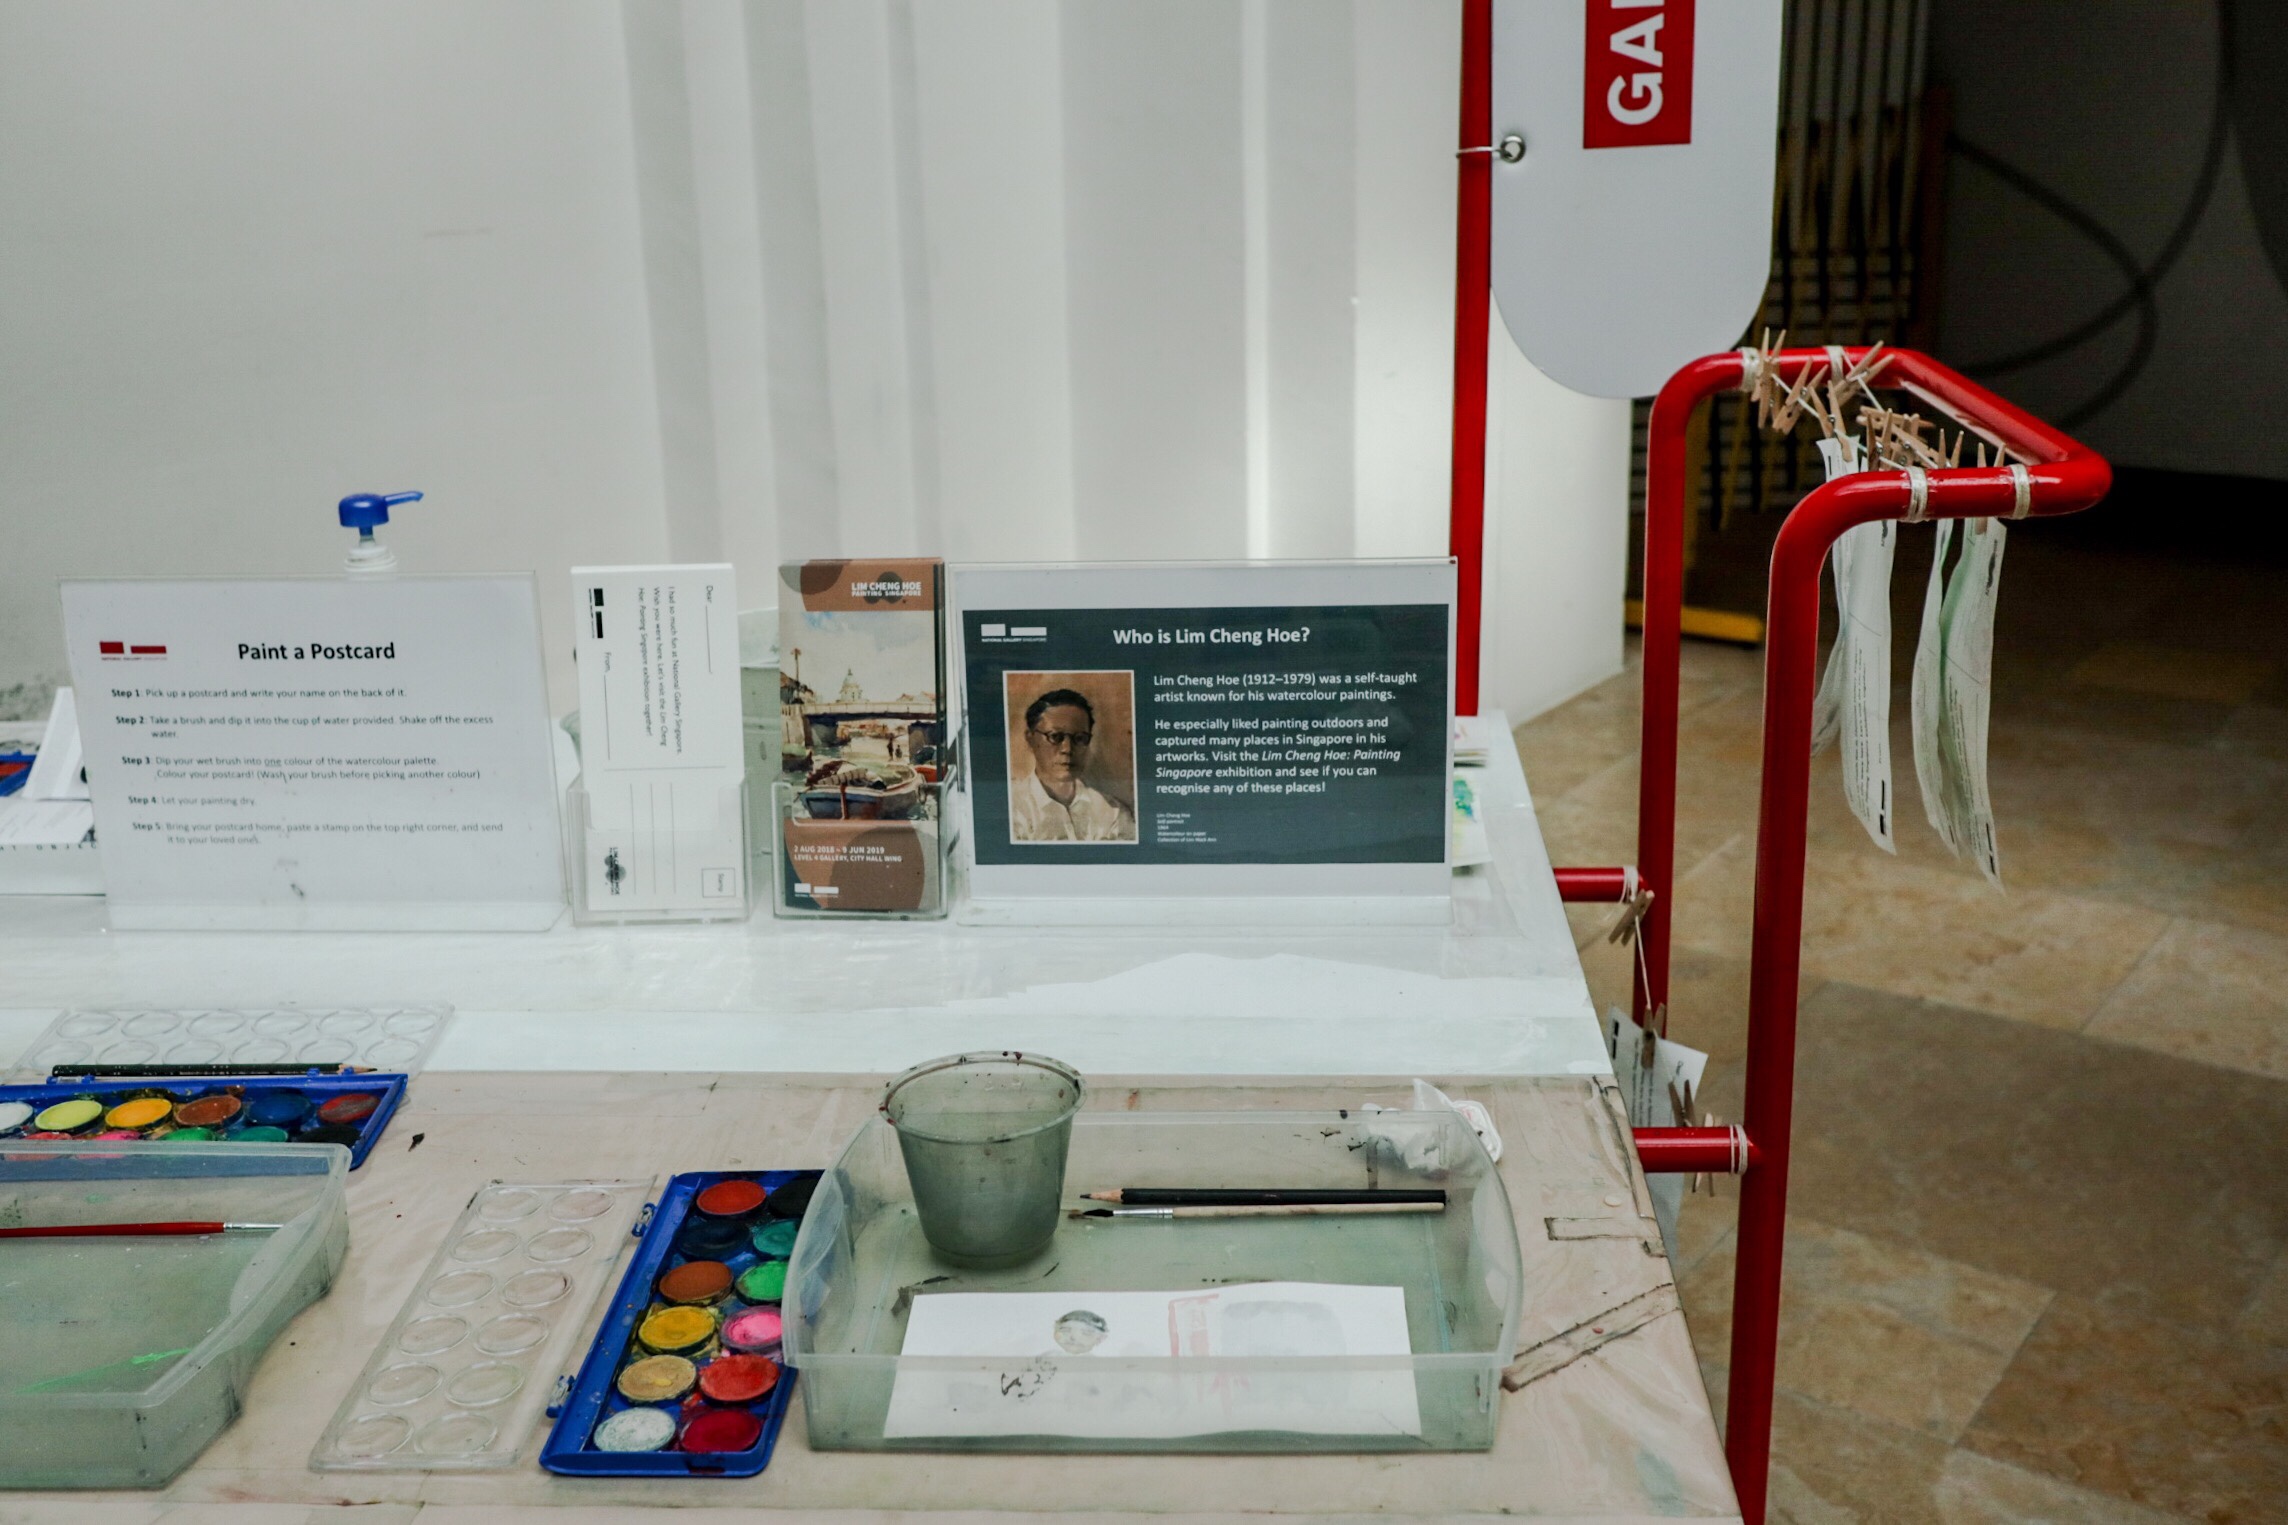 Lim Cheng Hoe watercolour activity booth at the National Gallery Singapore.